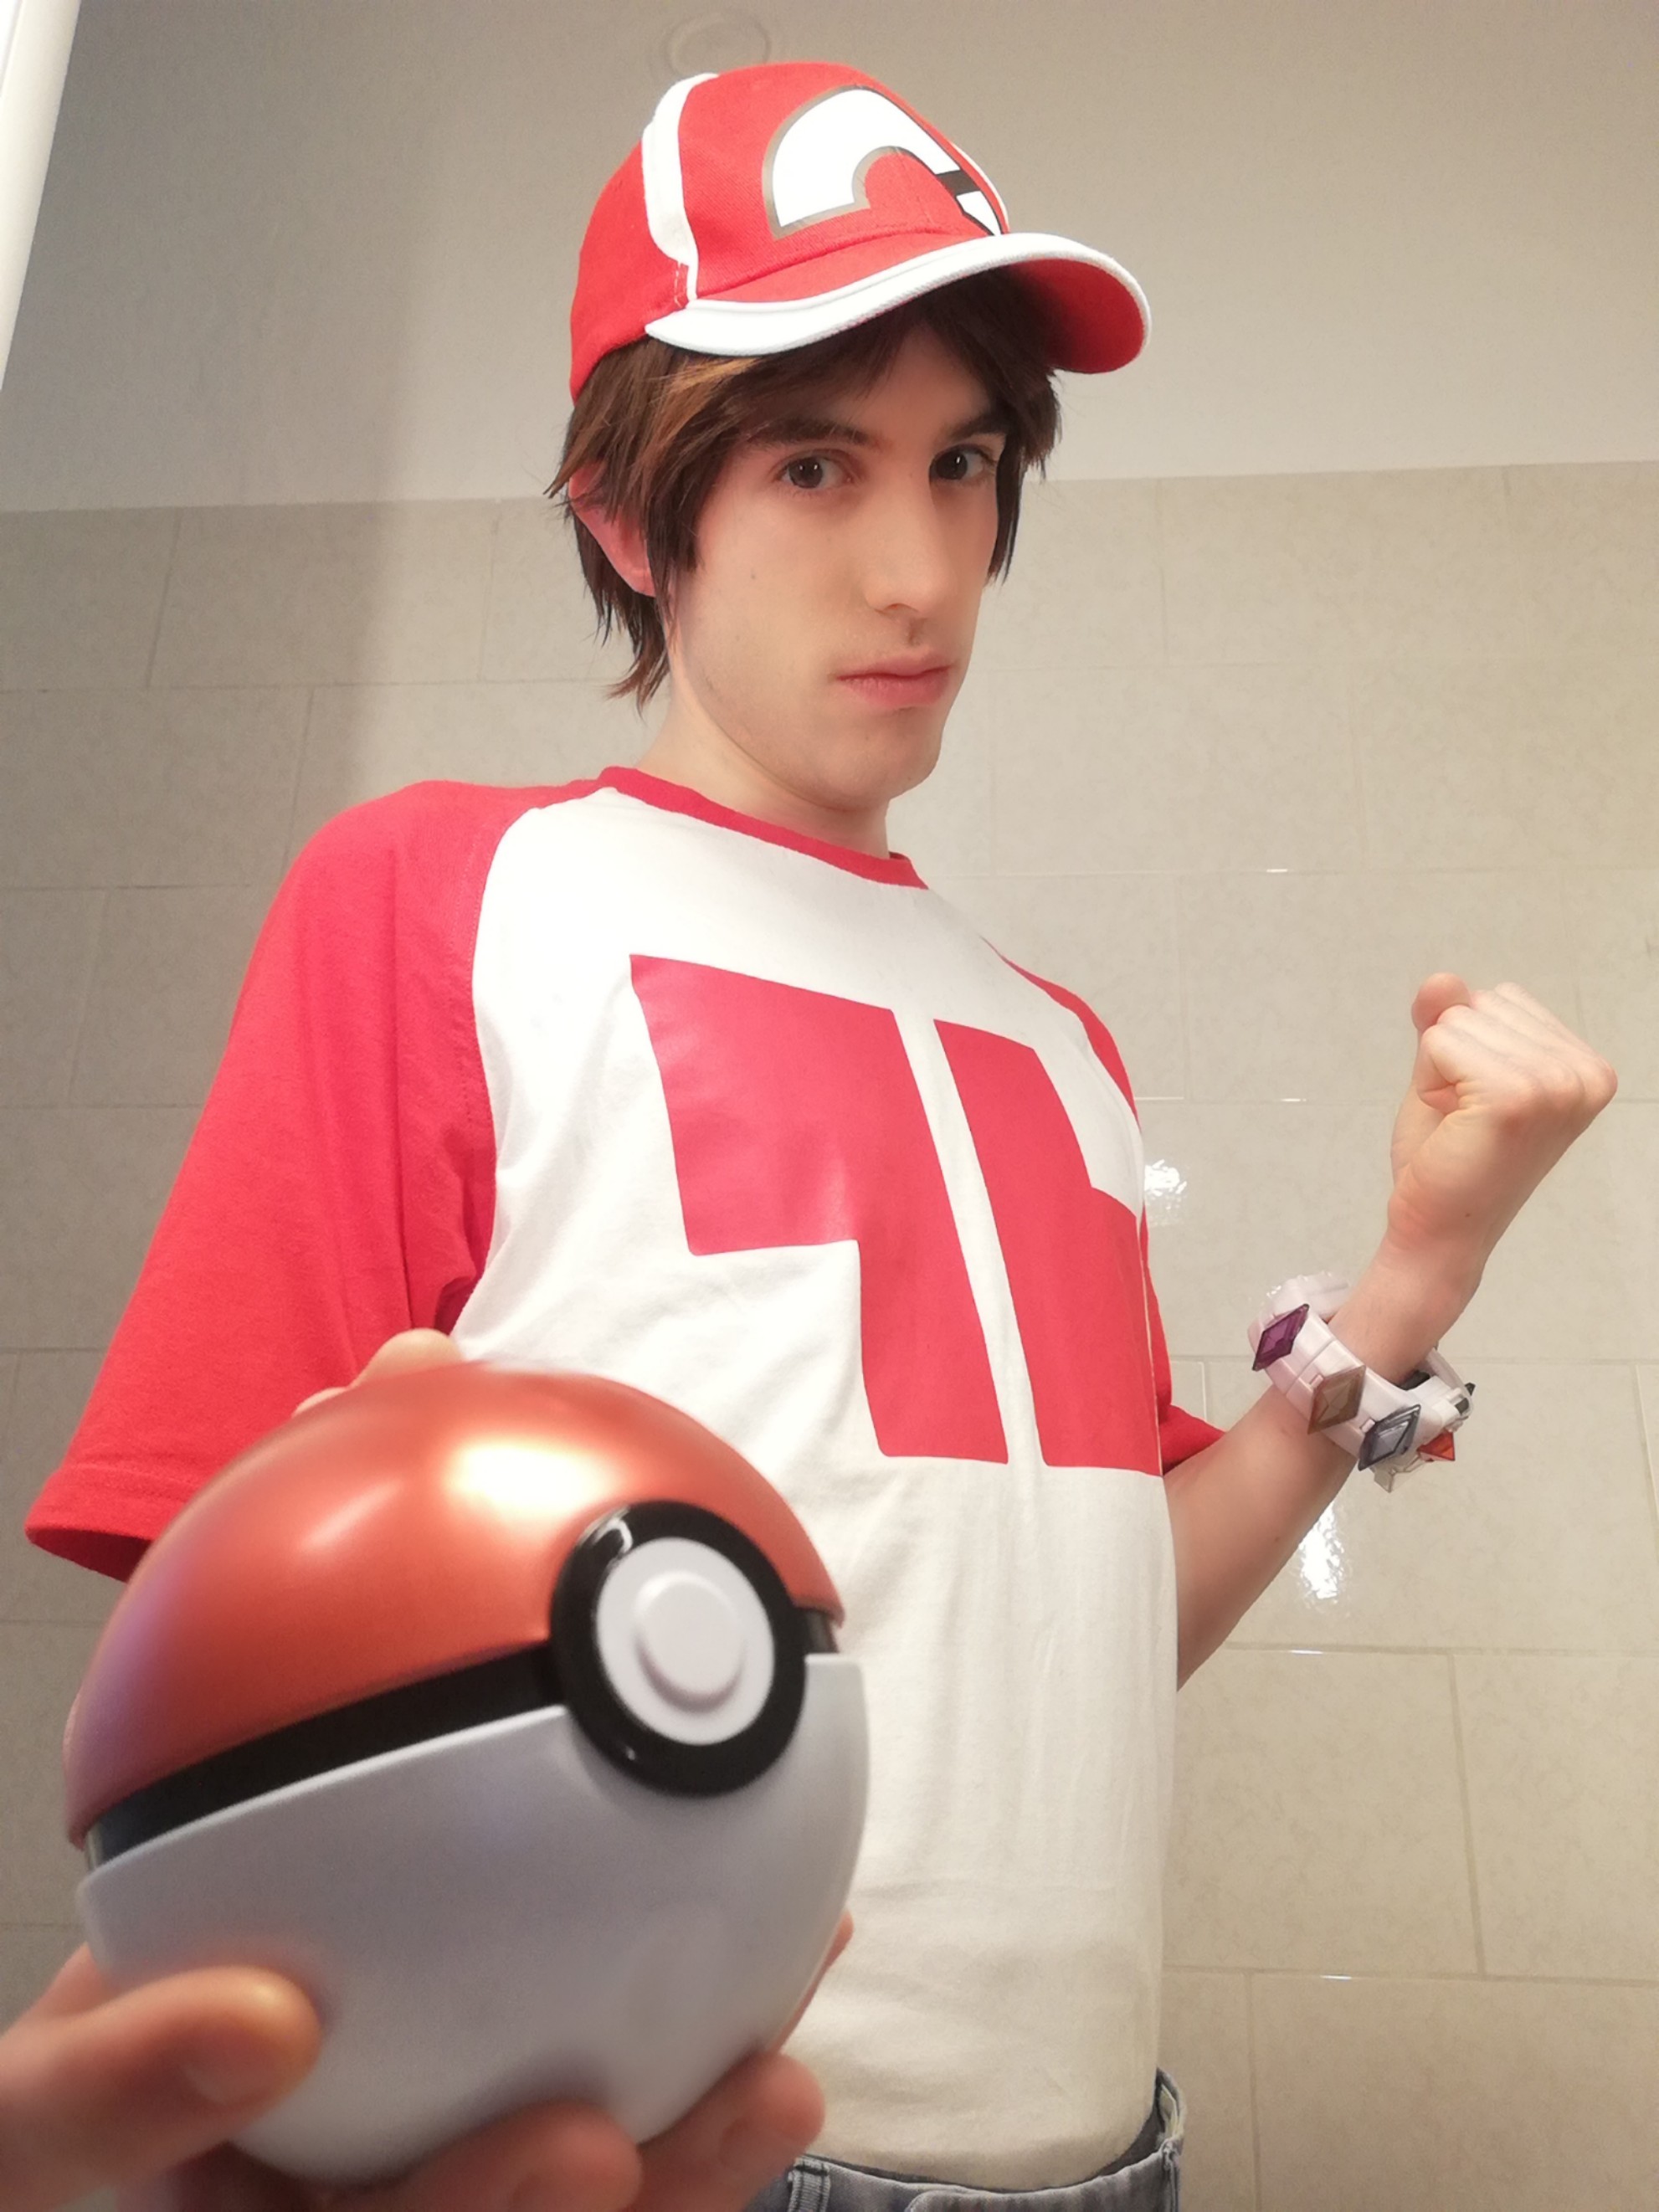 Pokemon Sun and Moon Trainer Red and Blue Cosplay Costumes